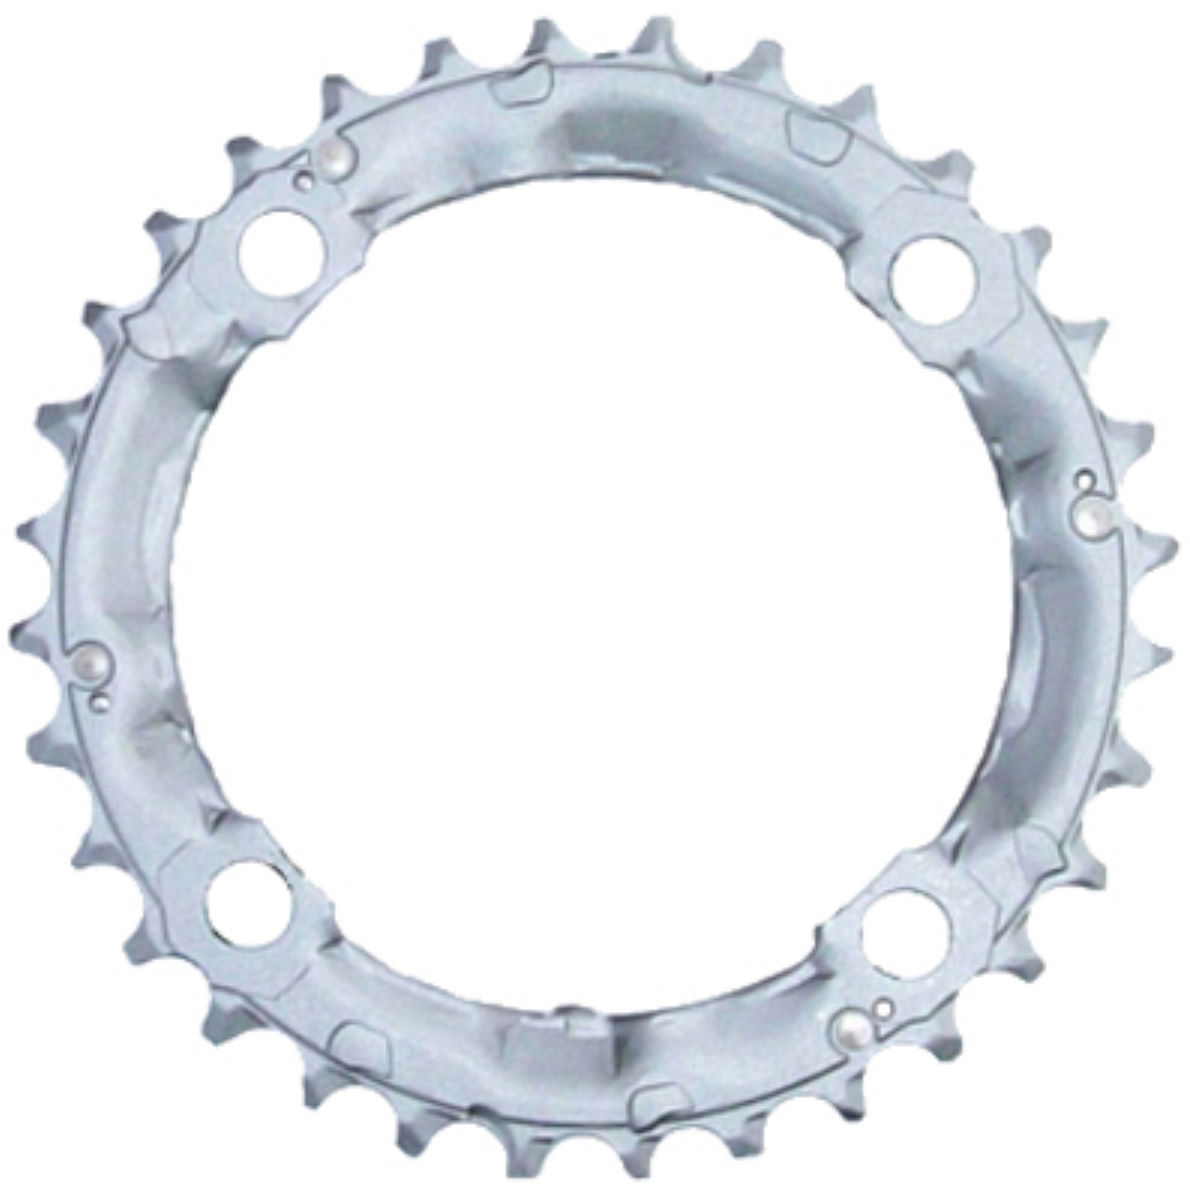 Chainring Shimano FC-M510 Deore 9-Speed 32T Silver Chainring Shimano FC-M510 Deore 9-Speed 32T Silver